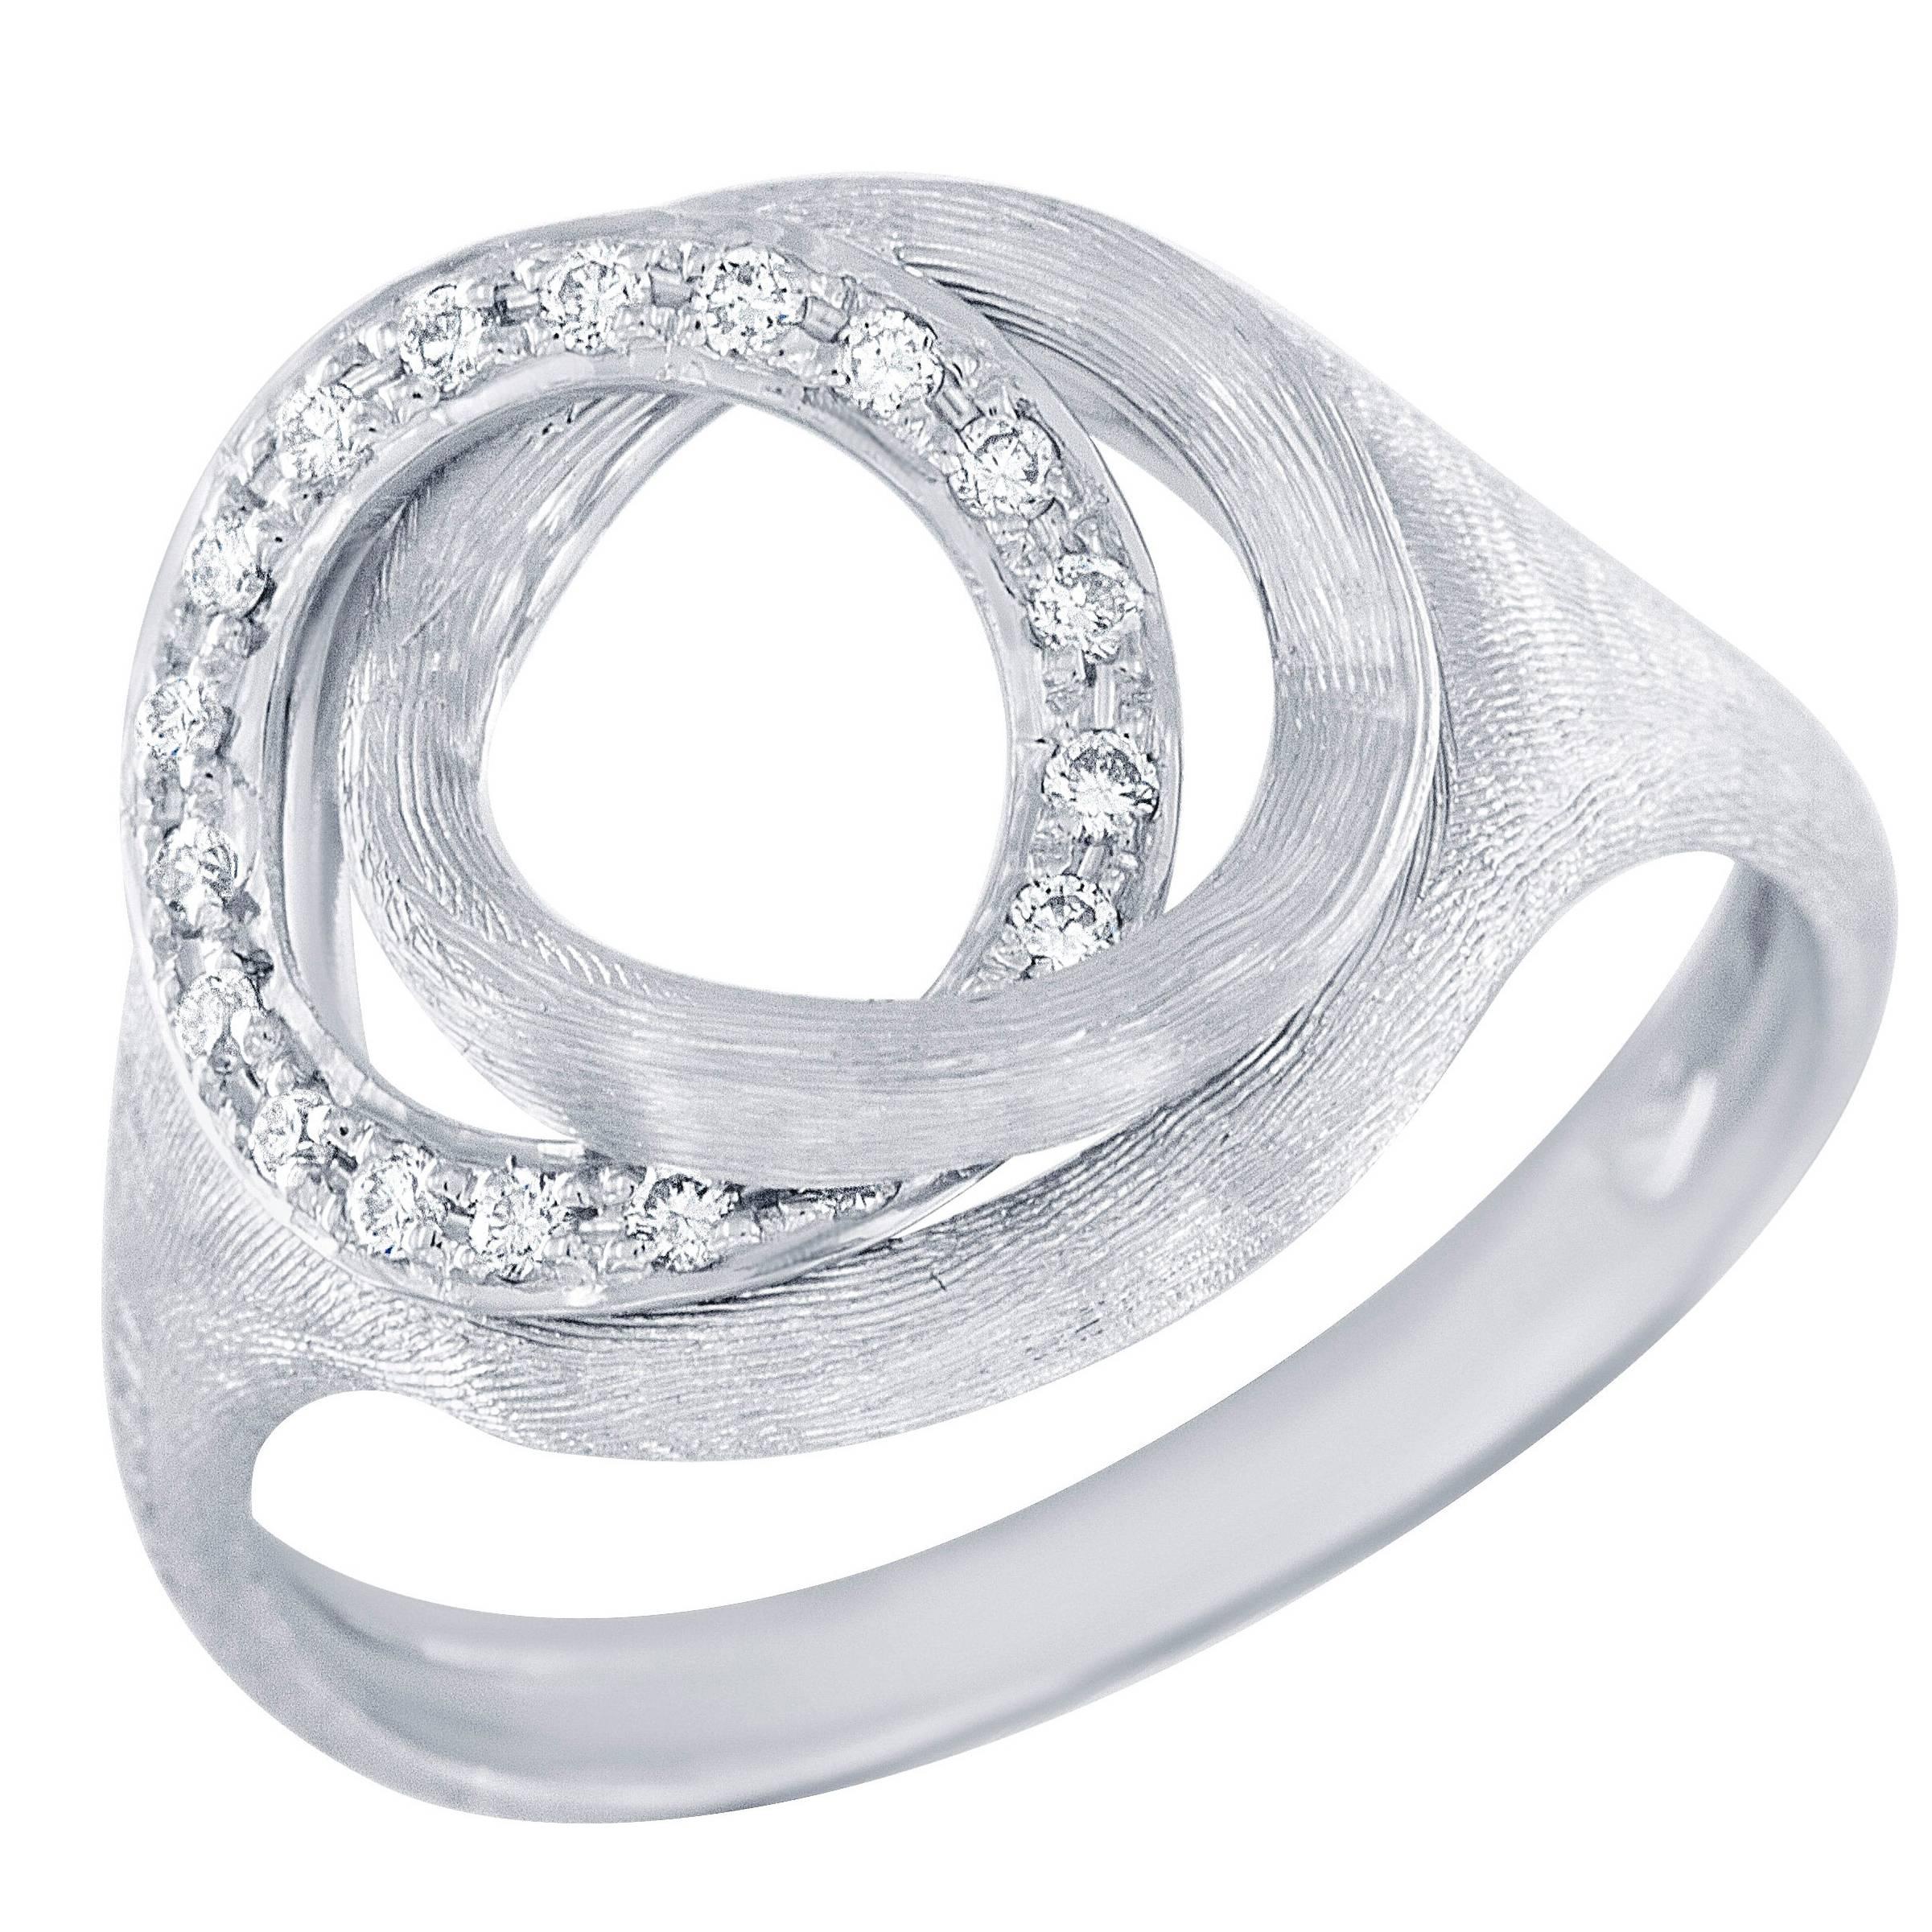 Marco Bicego 0.14 Carat Round Brilliant Cut Diamond White Gold Ring For Sale